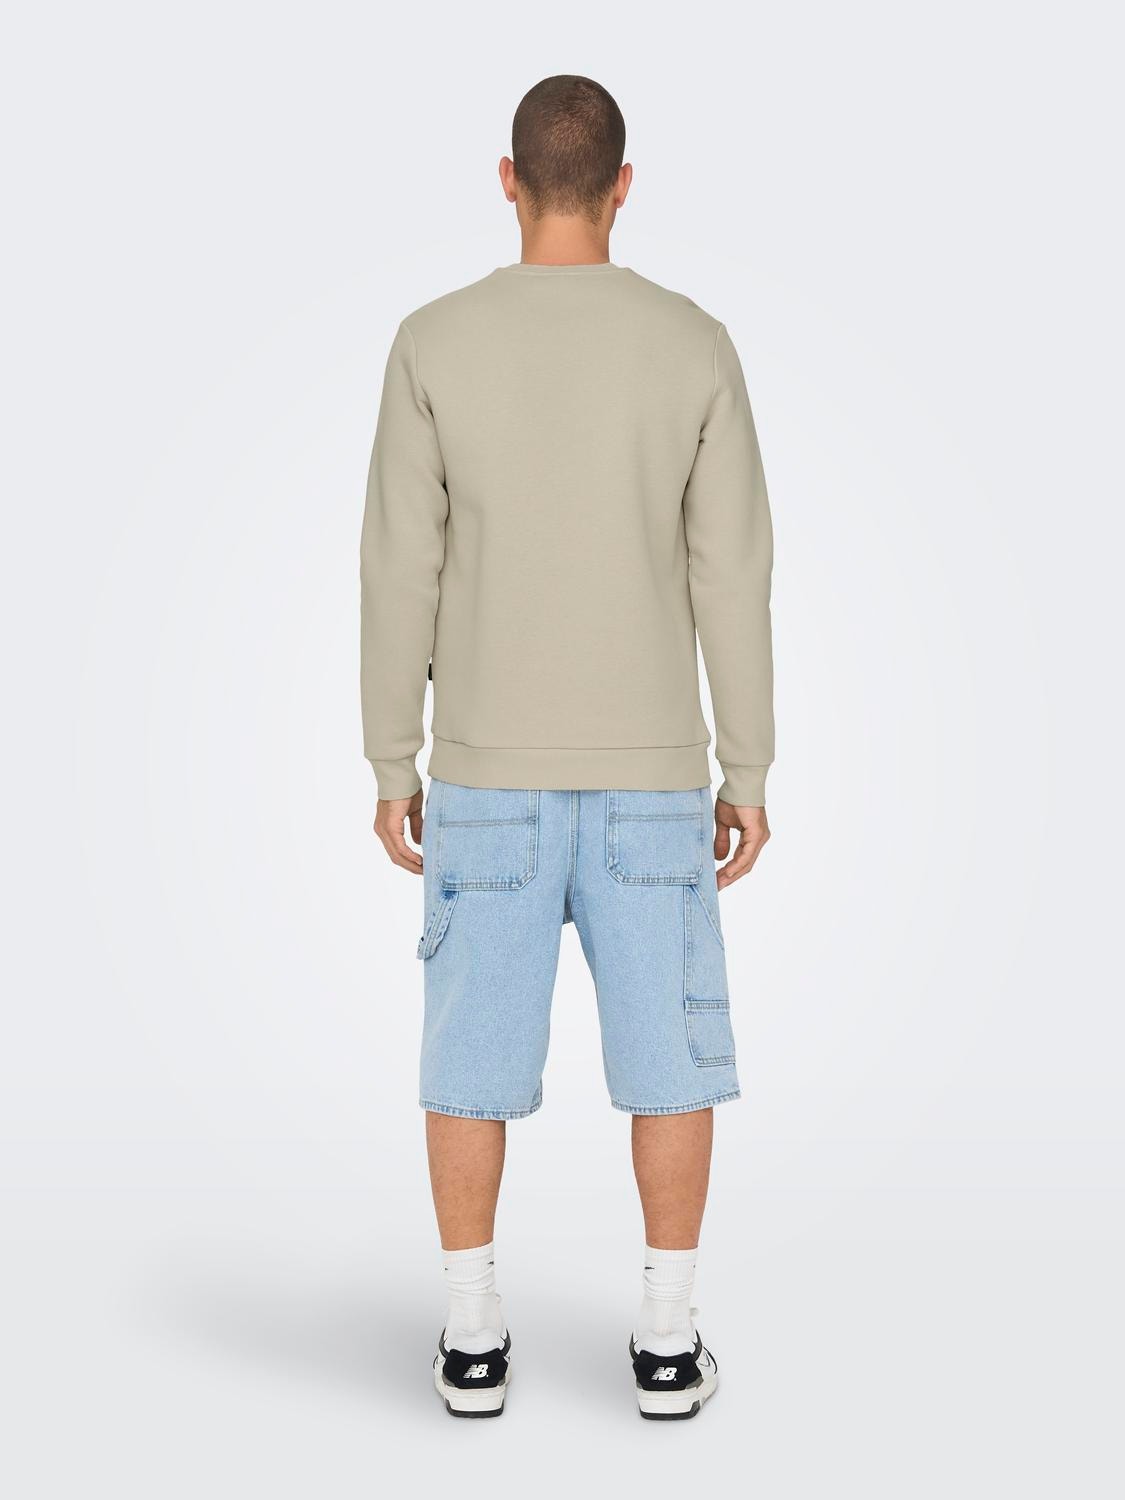 ONLY & SONS O-hals sweatshirt -Silver Lining - 22018683